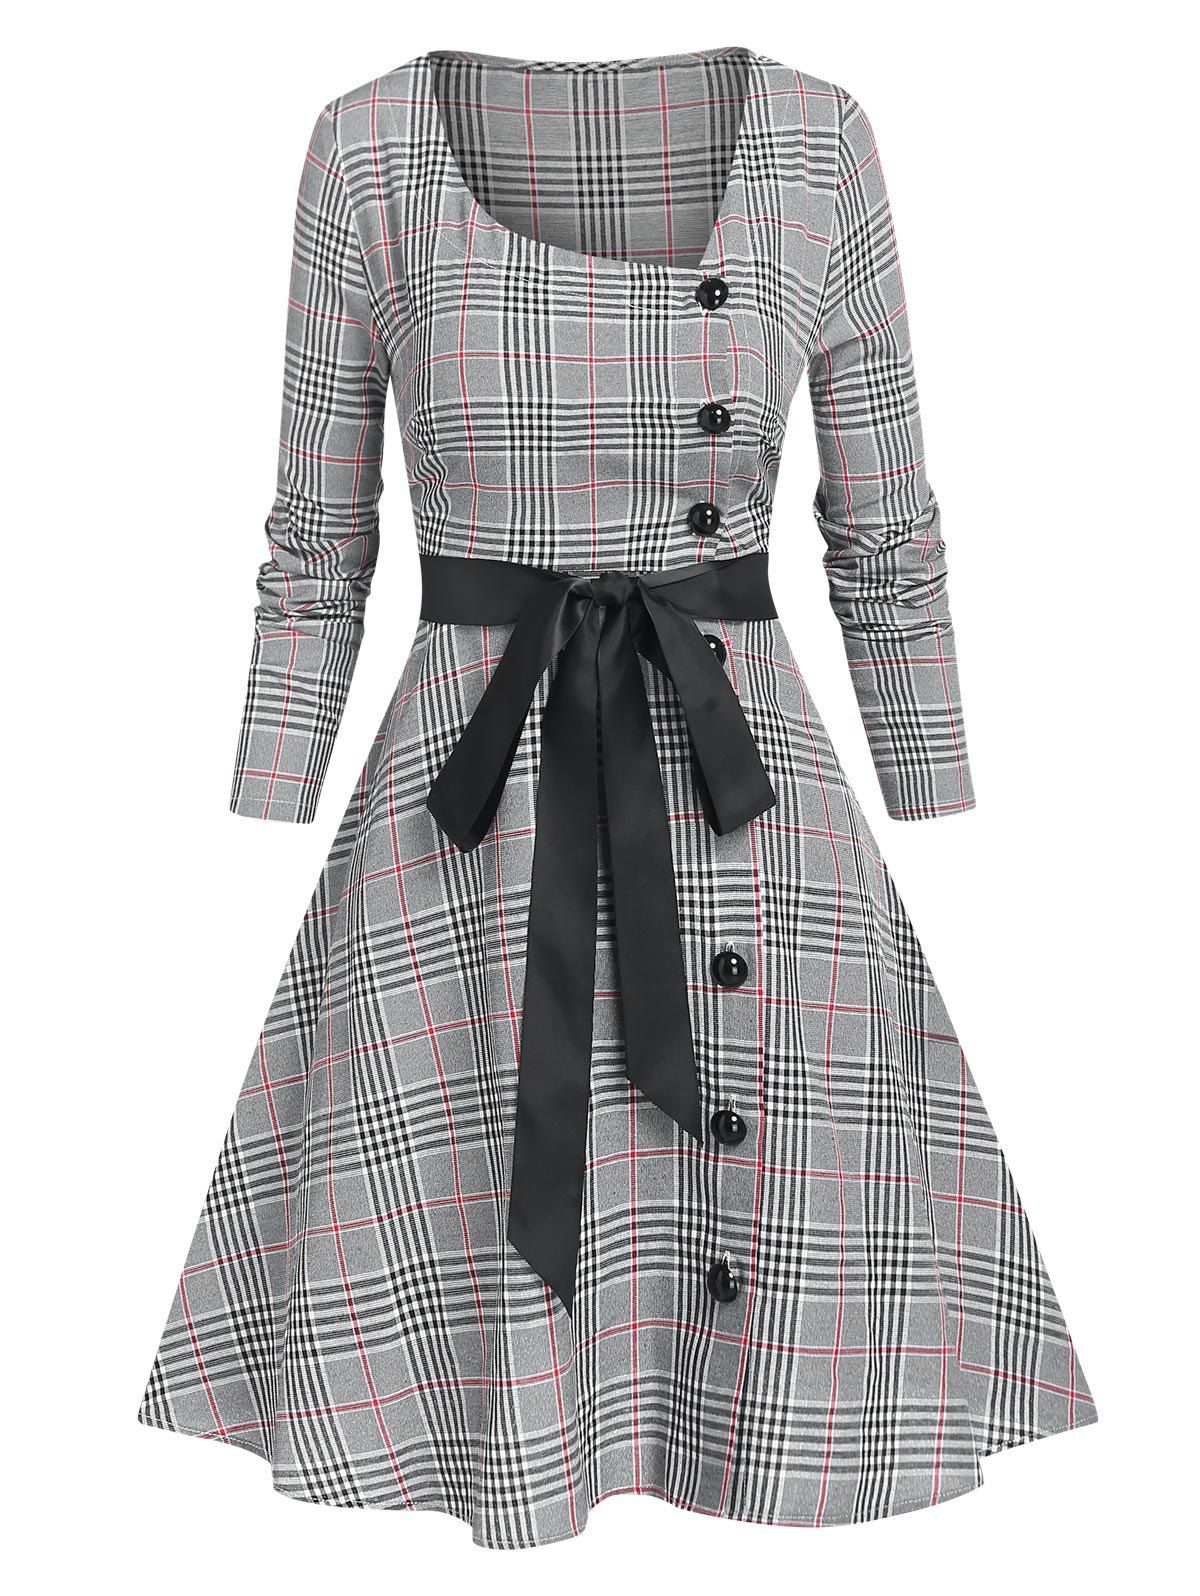 Skew Neck Plaid Fit and Flare Dress - GRAY XL